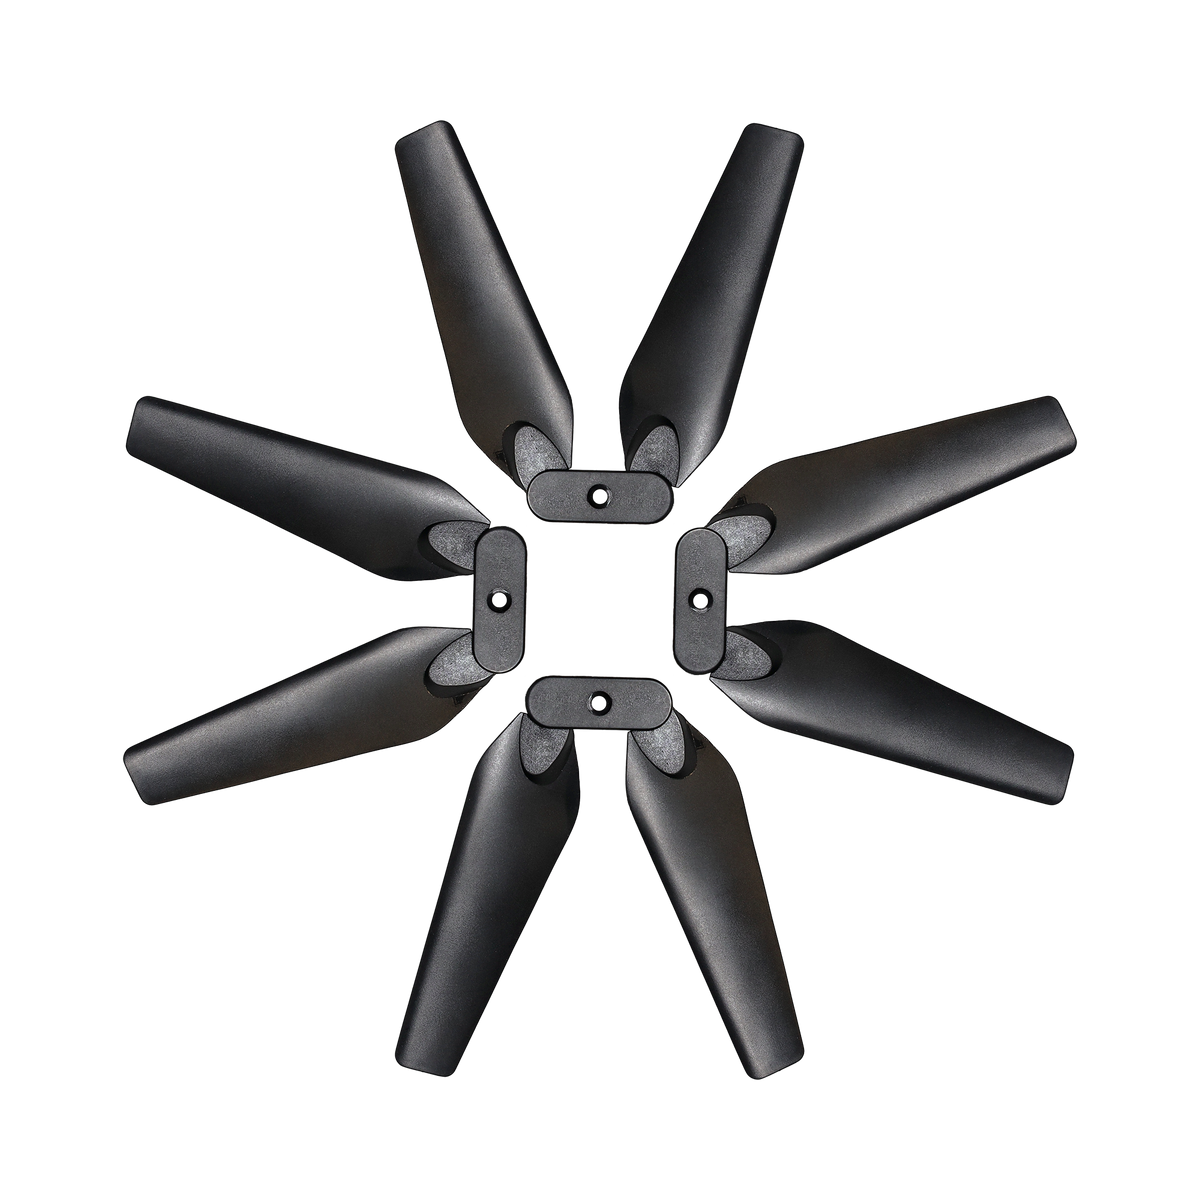 Replacement rotor blades for quadrocopter QC-800SE WiFi